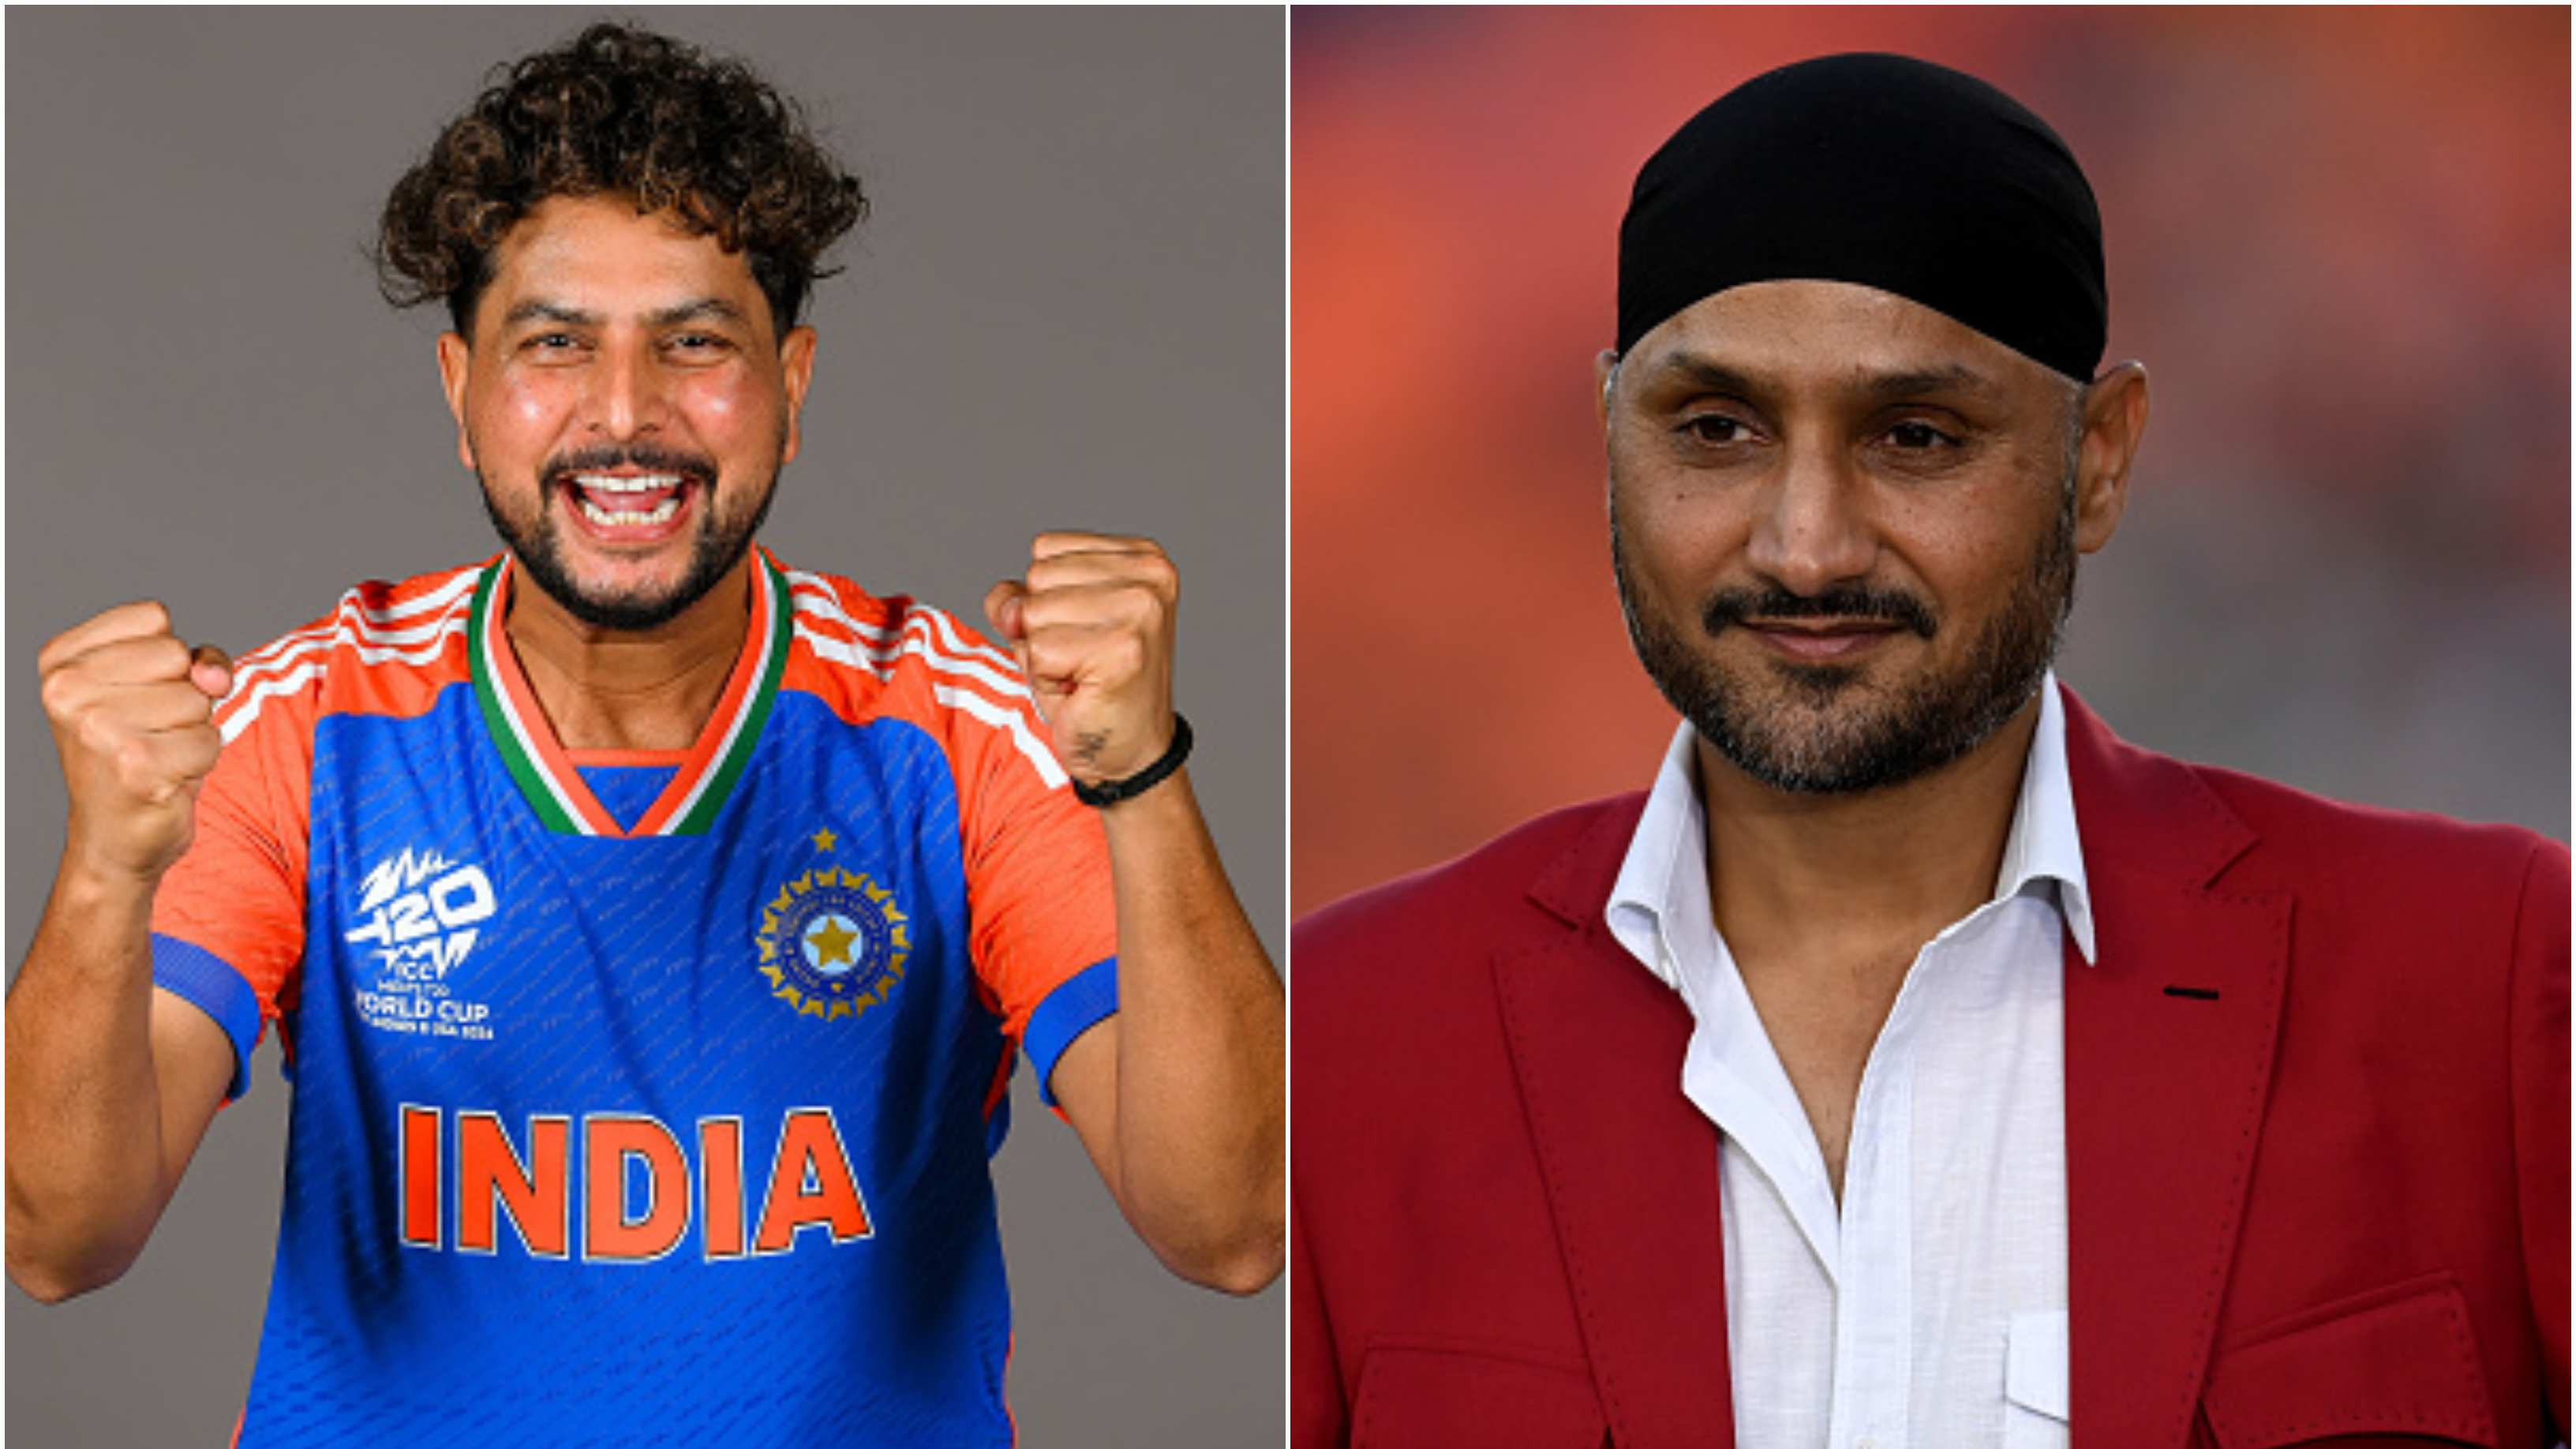 Harbhajan Singh bats for Kuldeep Yadav’s inclusion in Indian XI vs Pakistan; expects two players to influence the game